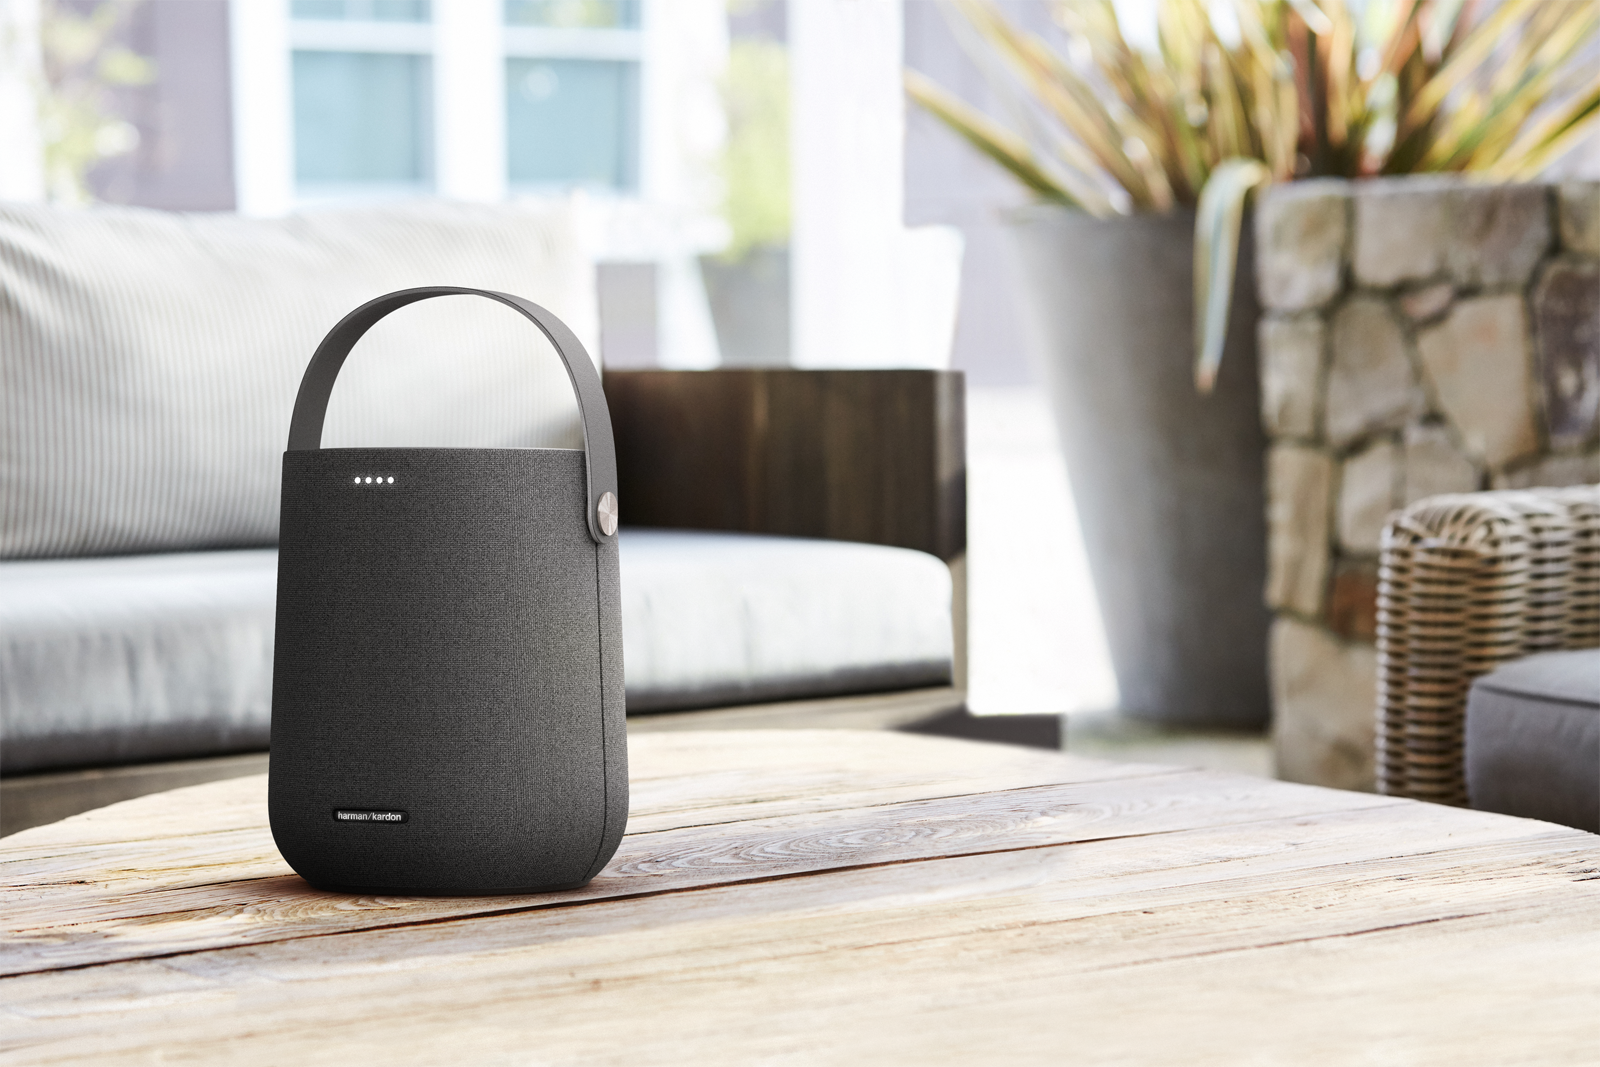 Harman Kardon Citation 200 is a super portable speaker with Wi-Fi, Bluetooth and Google Assistant photo 1